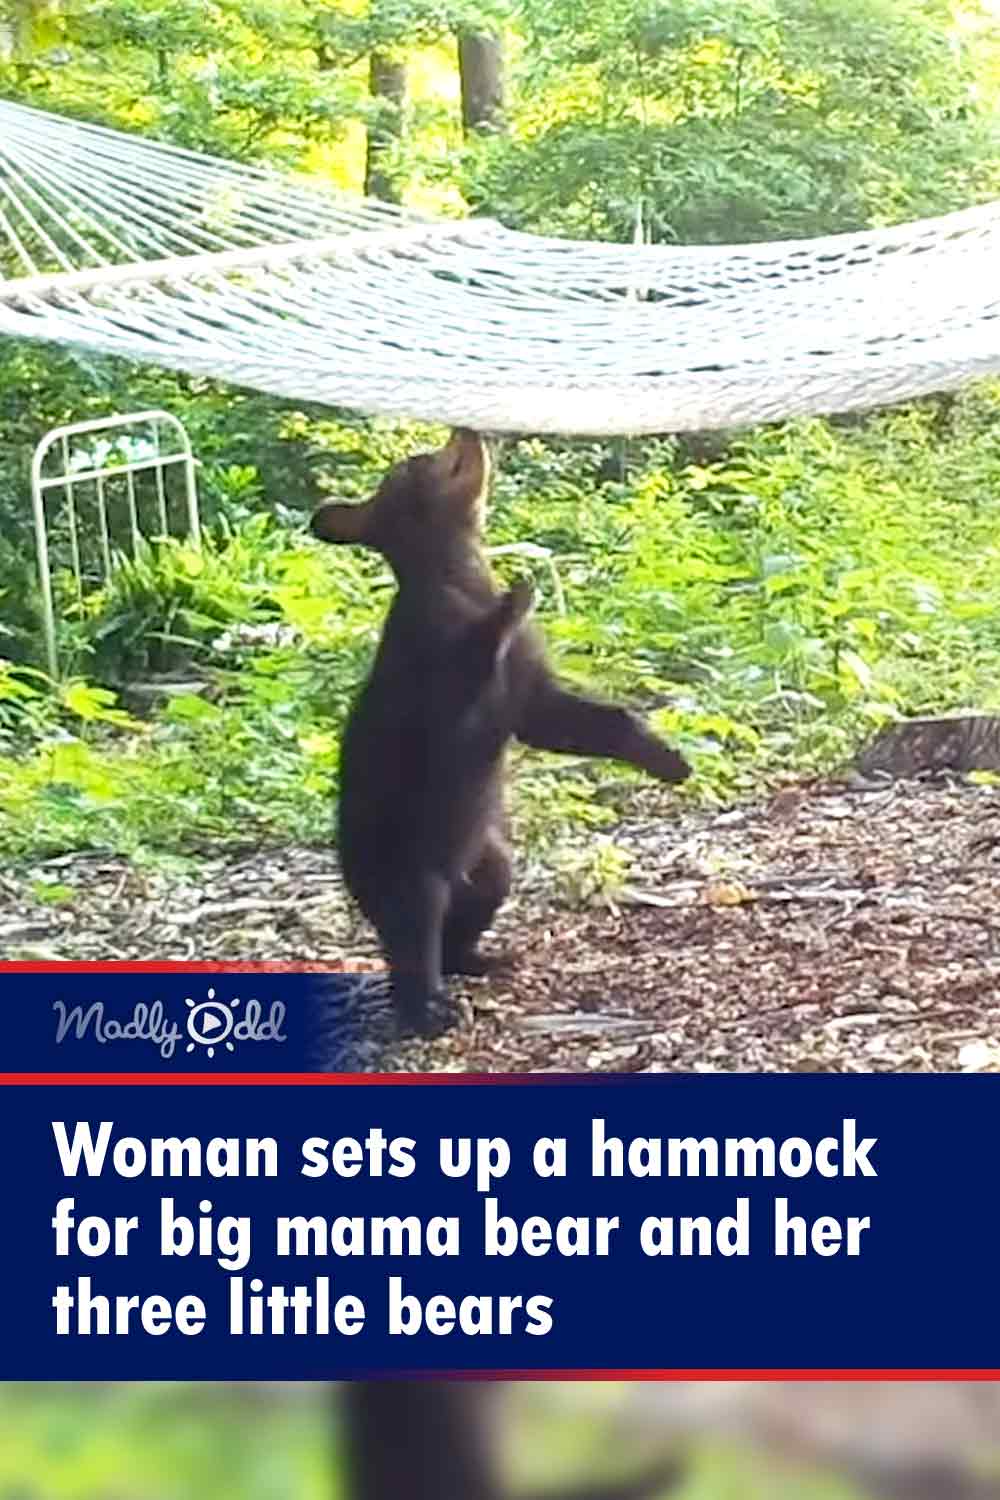 Woman sets up a hammock for big mama bear and her three little bears